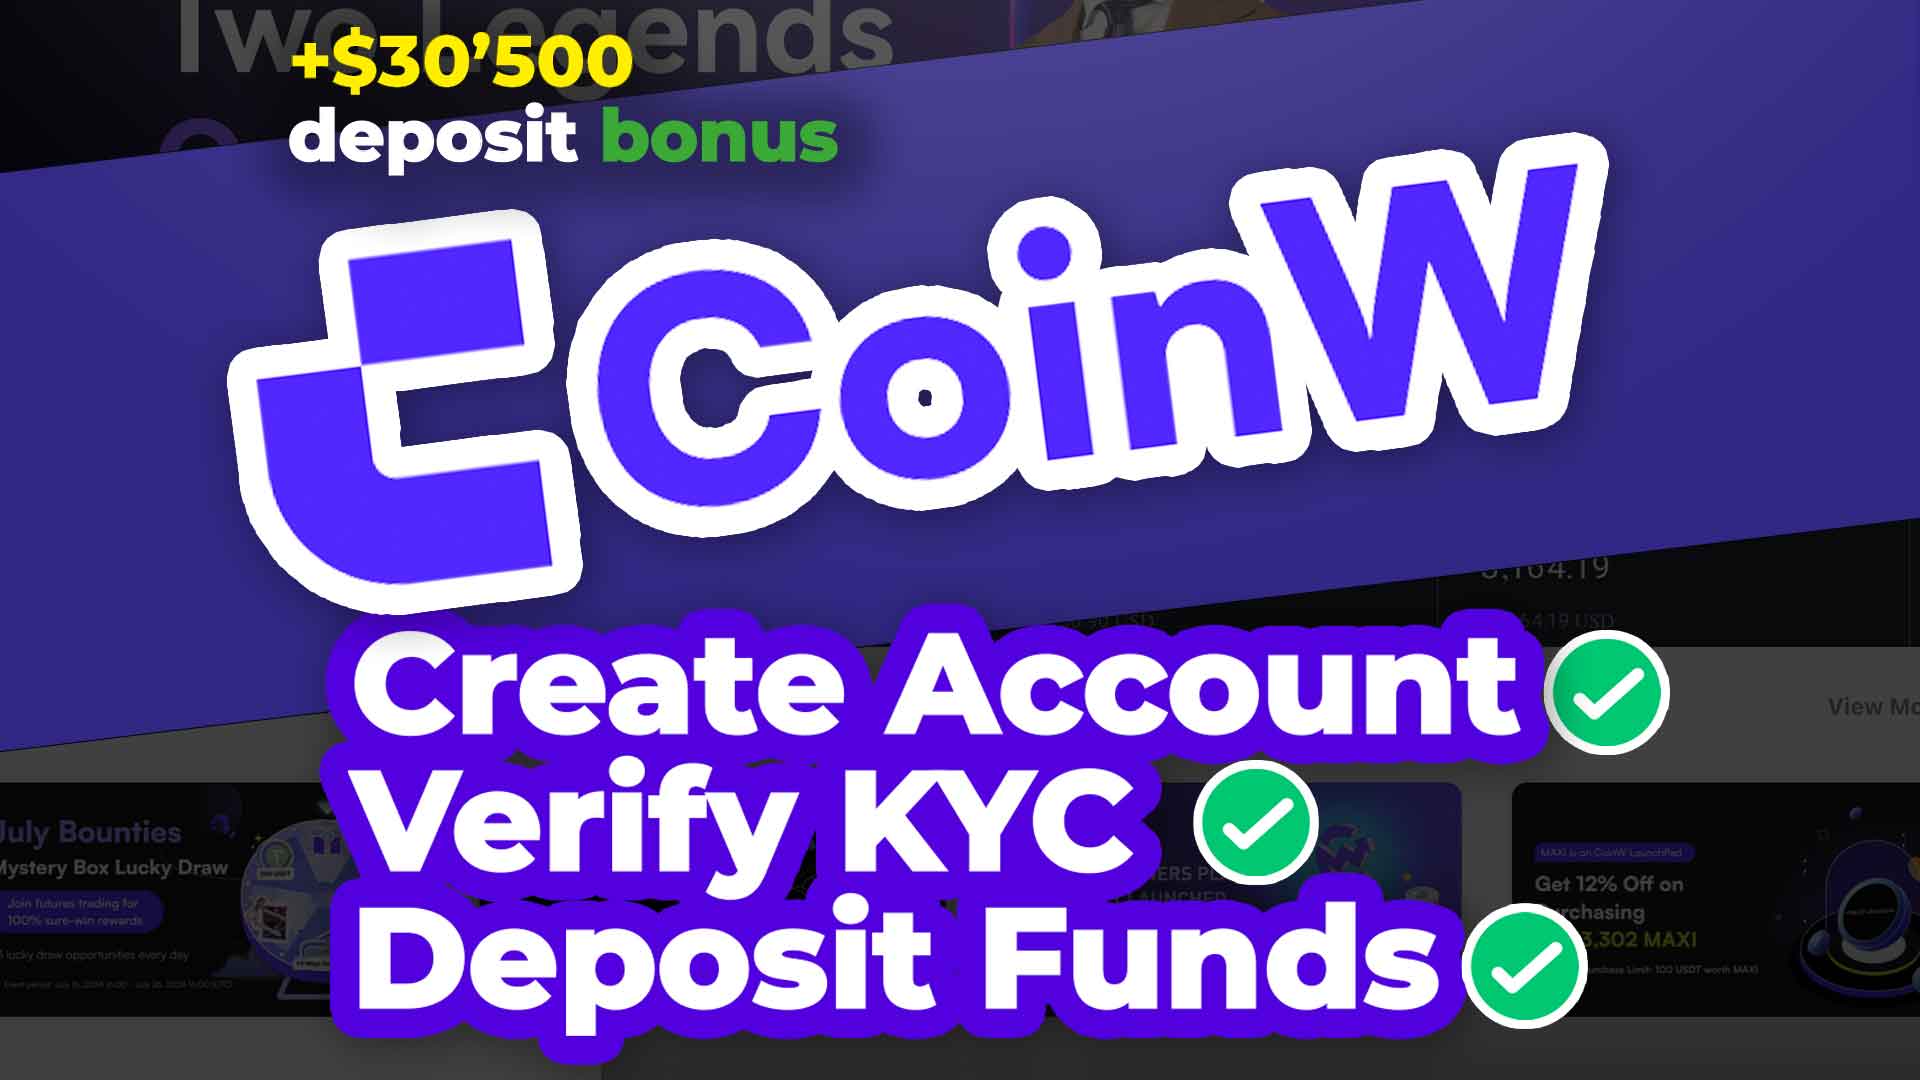 CoinW Account Setup - How to Create an Account, Claim Deposit Bonus and Deposit Funds